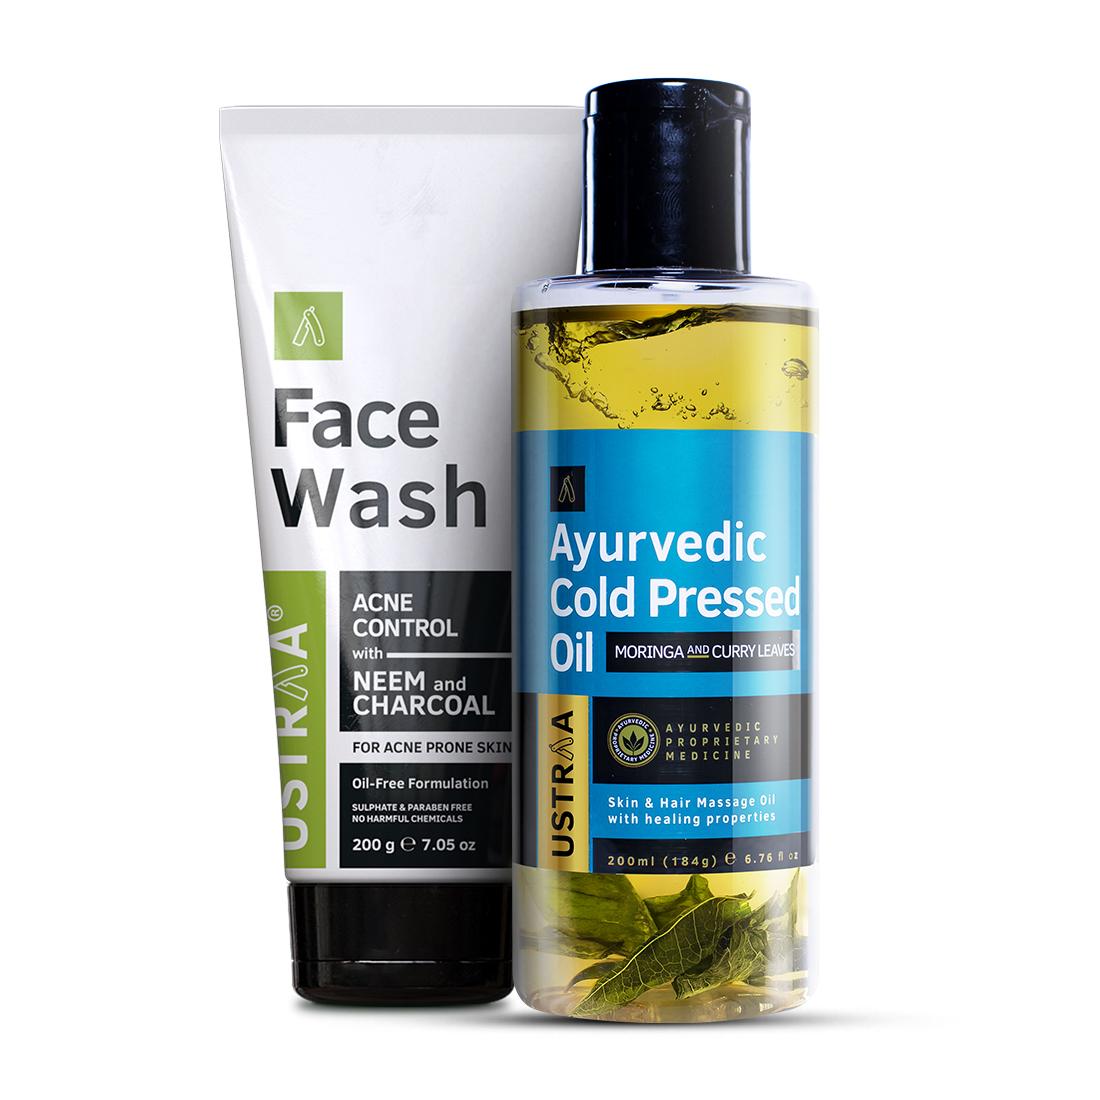 Ayurvedic Cold Pressed Oil & Face Wash Neem & Charcoal Combo